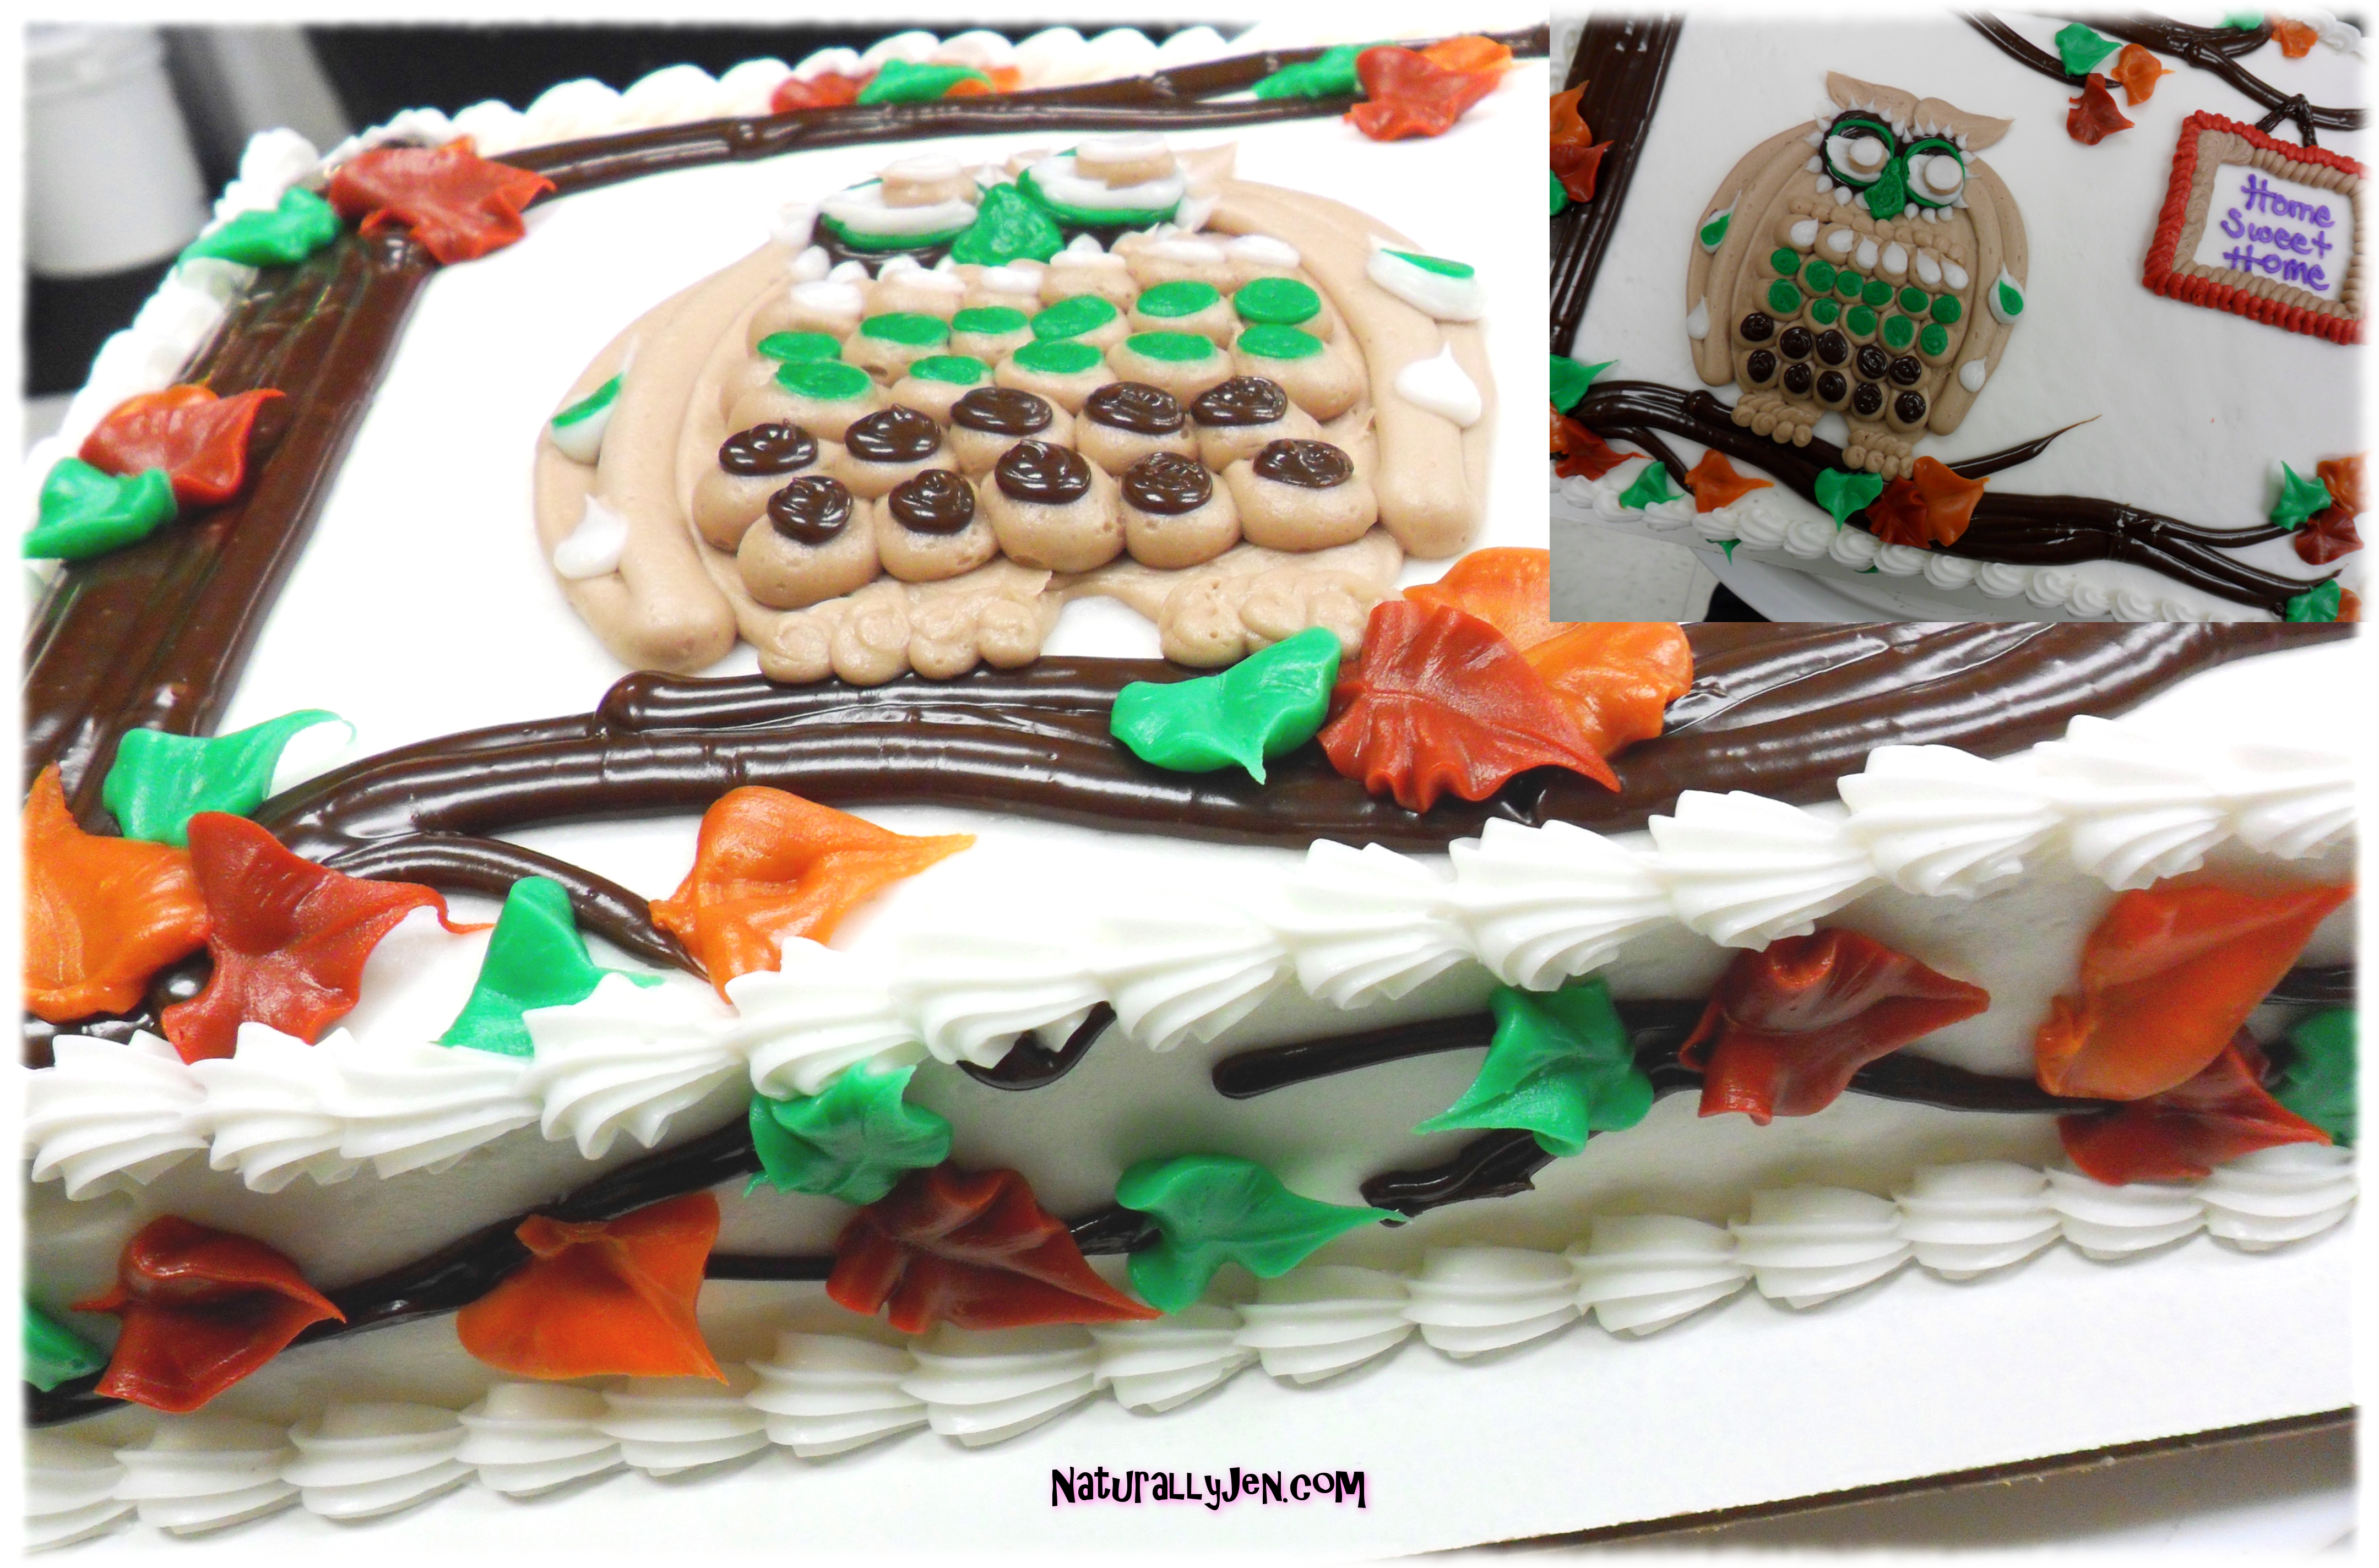 Owl Cake Decorated with Cake Sides Decorated